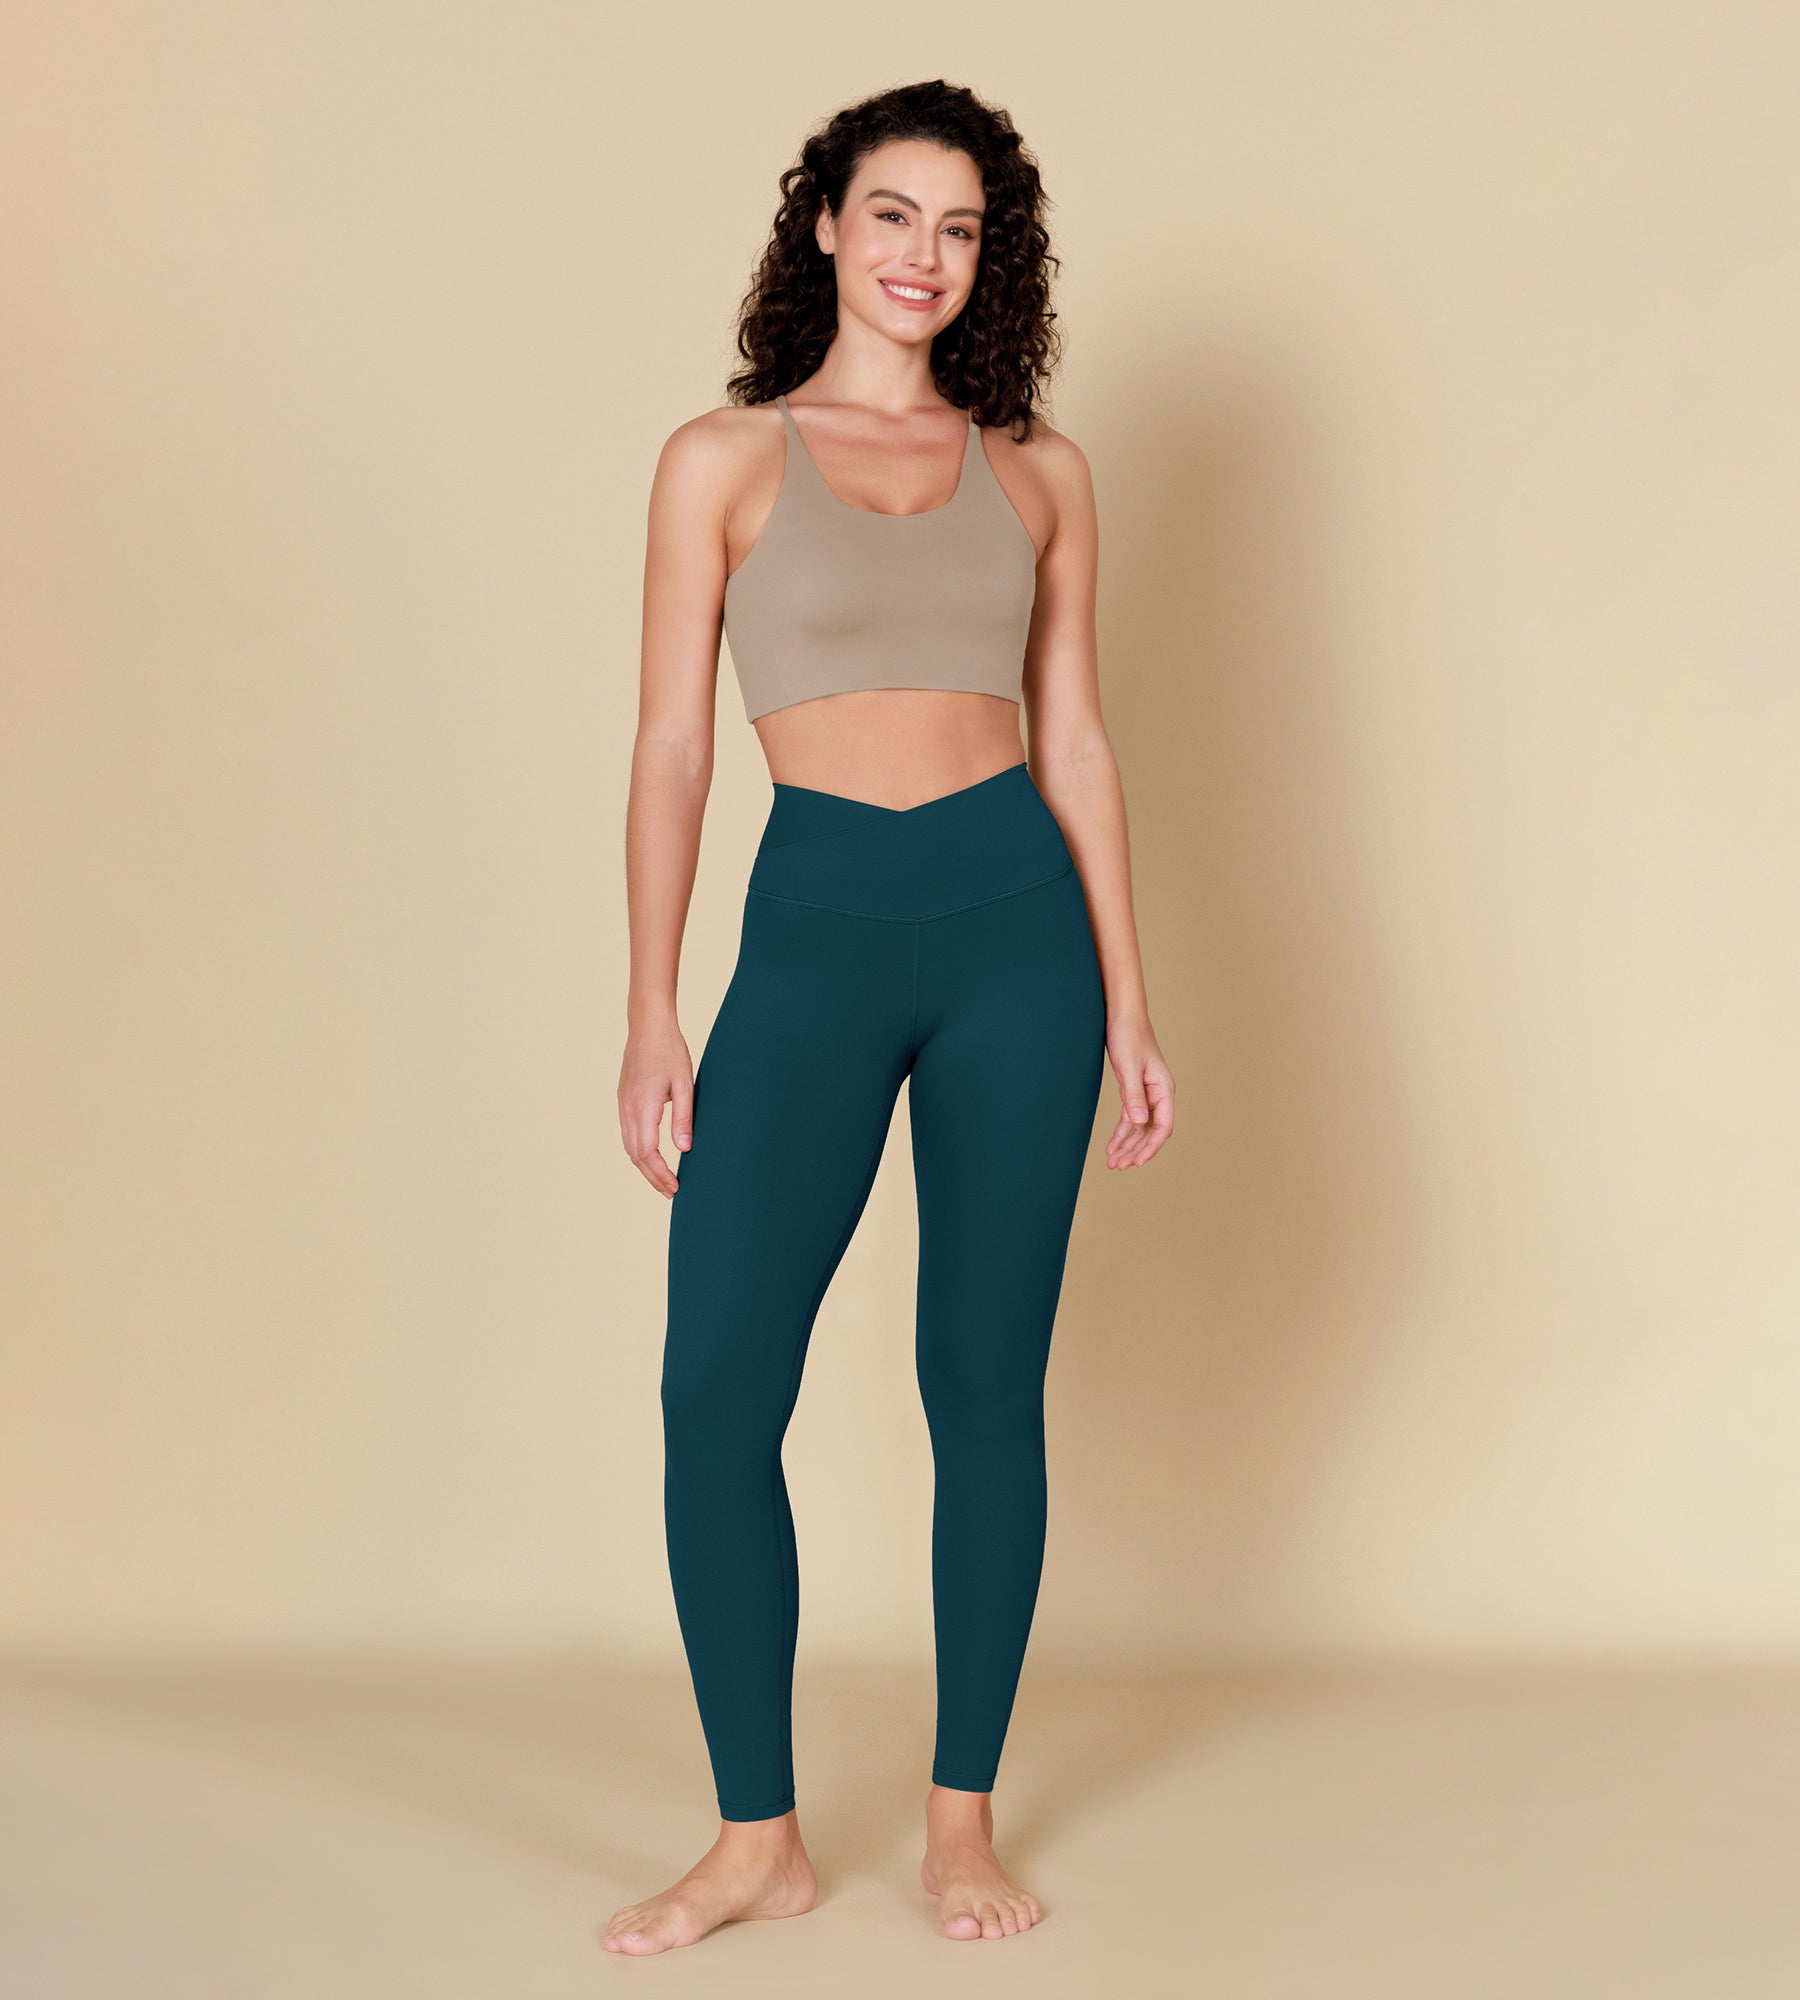 ODCLOUD Crossover 28" Leggings with Back Pocket - Classic Colors Forest Teal - ododos